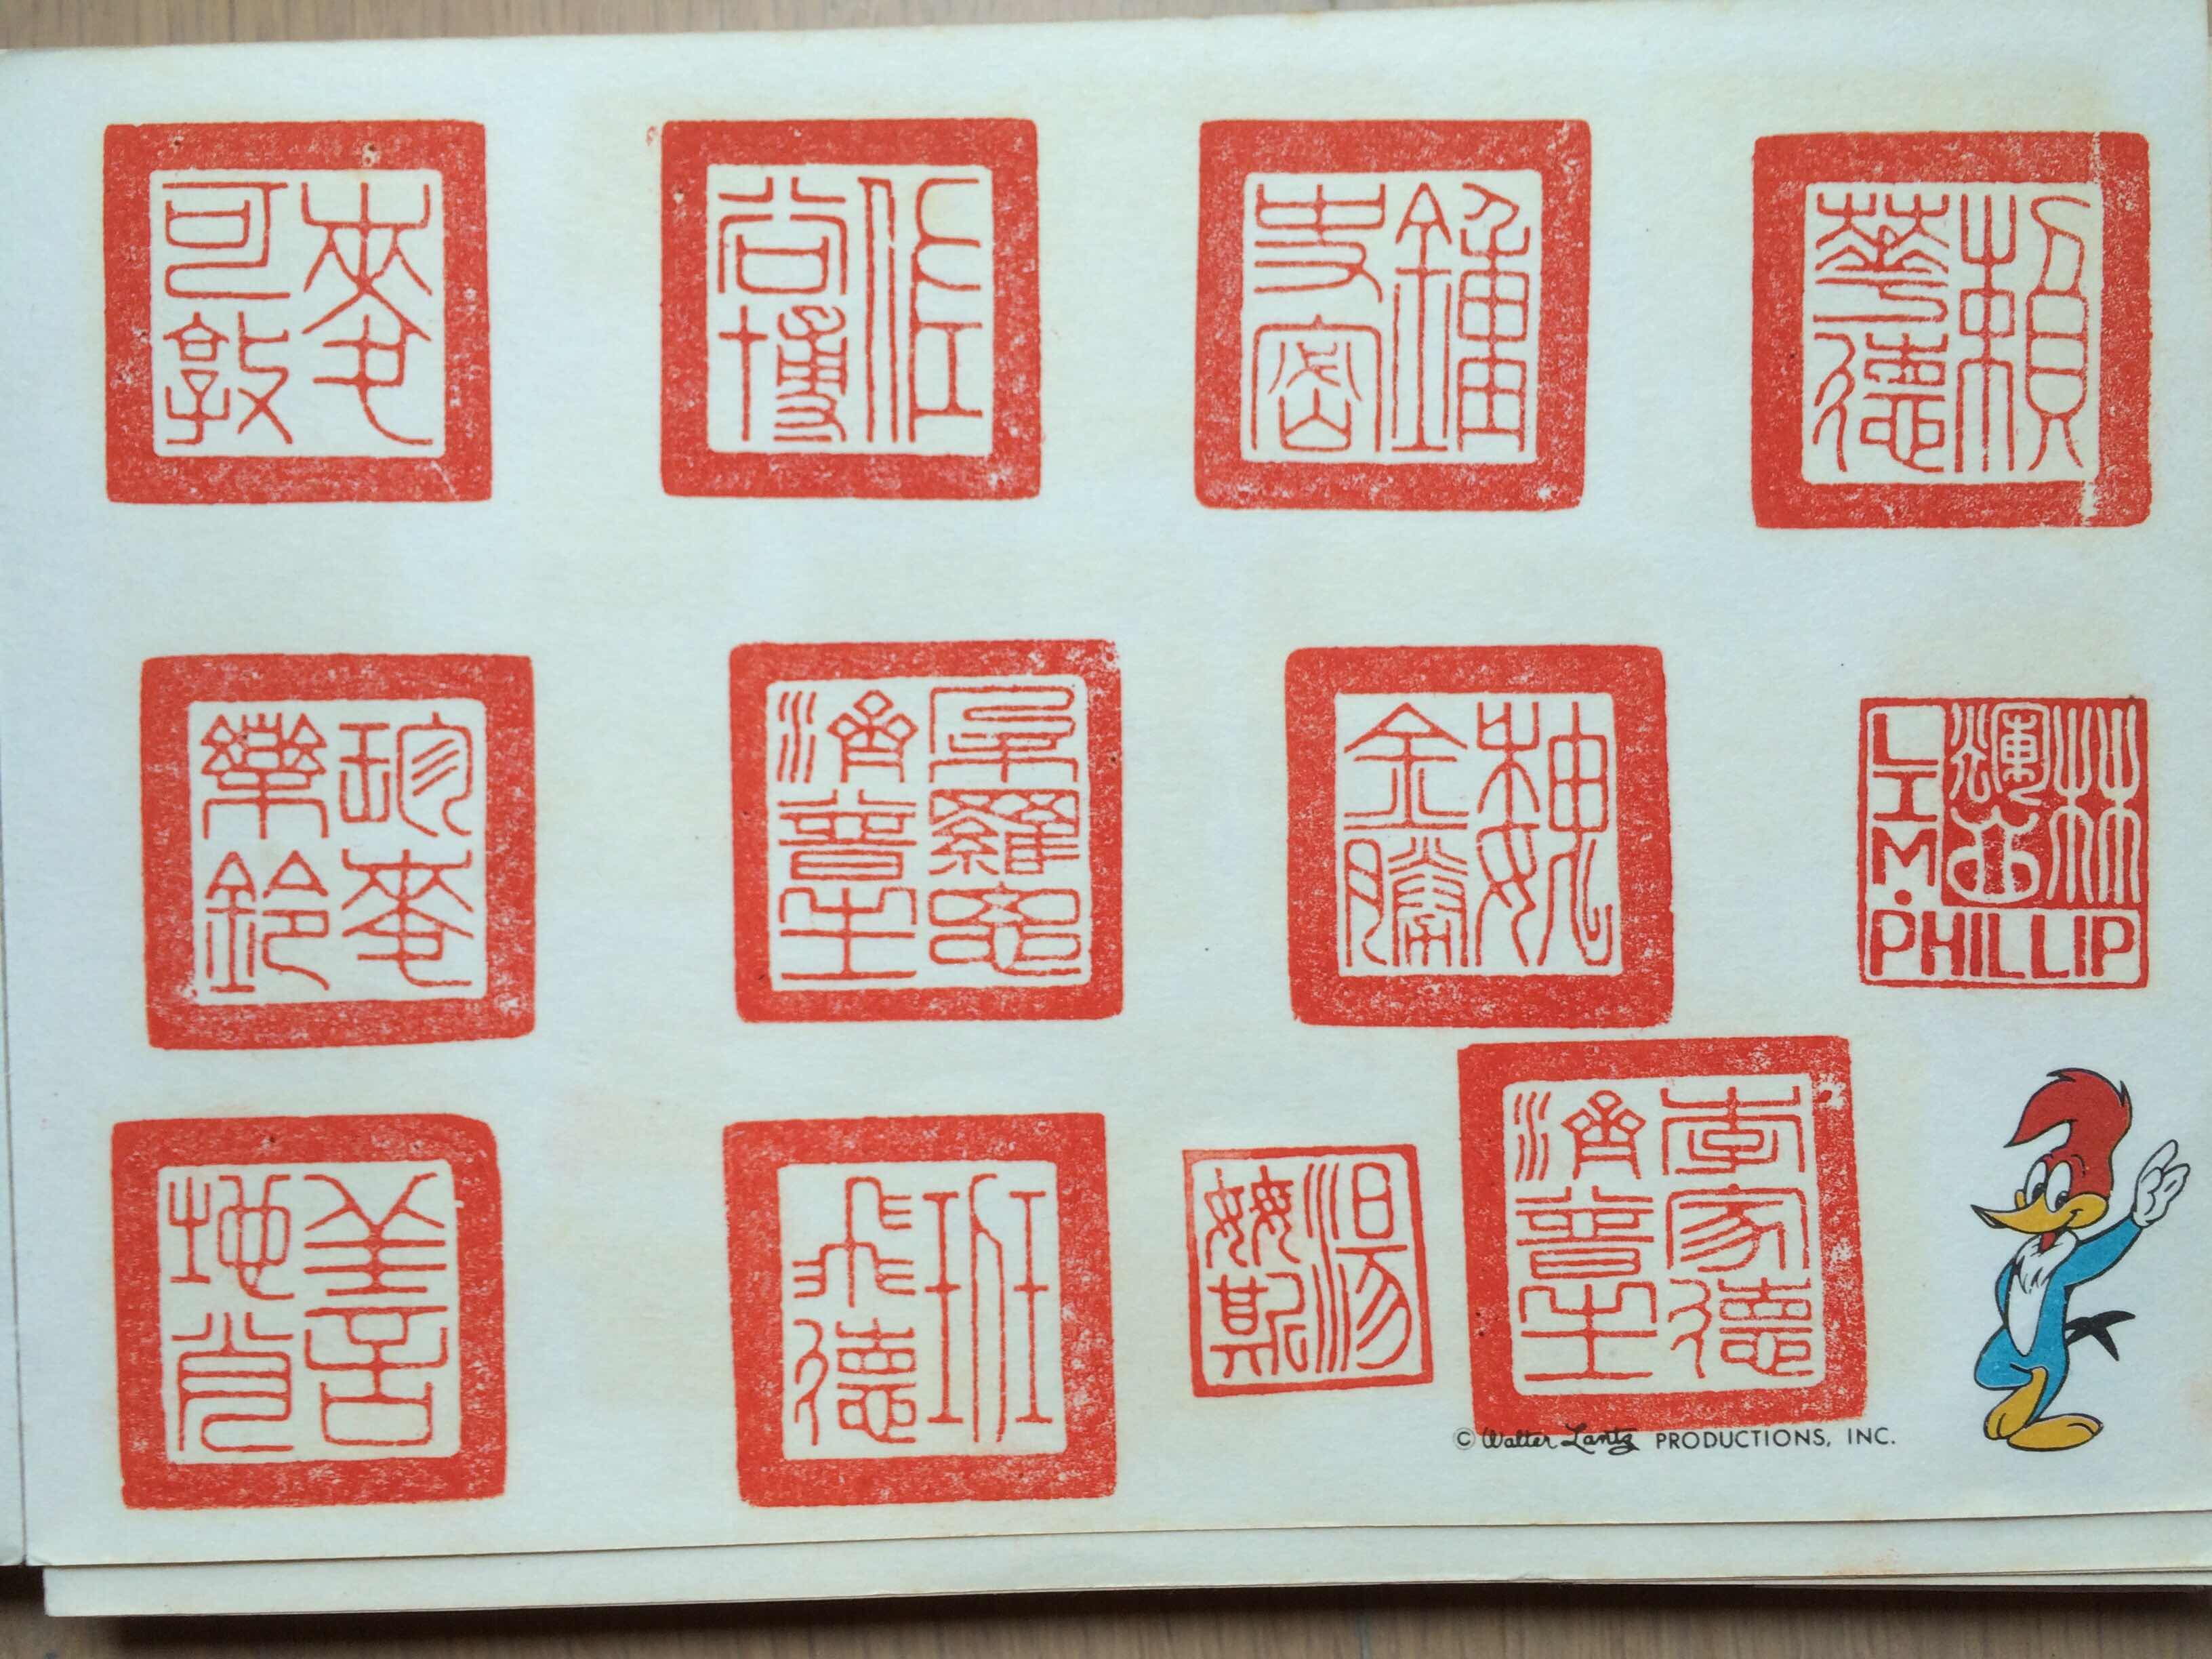 Seal Engraving & Calligraphy 篆刻印章/书法: 千个印章Thousands of